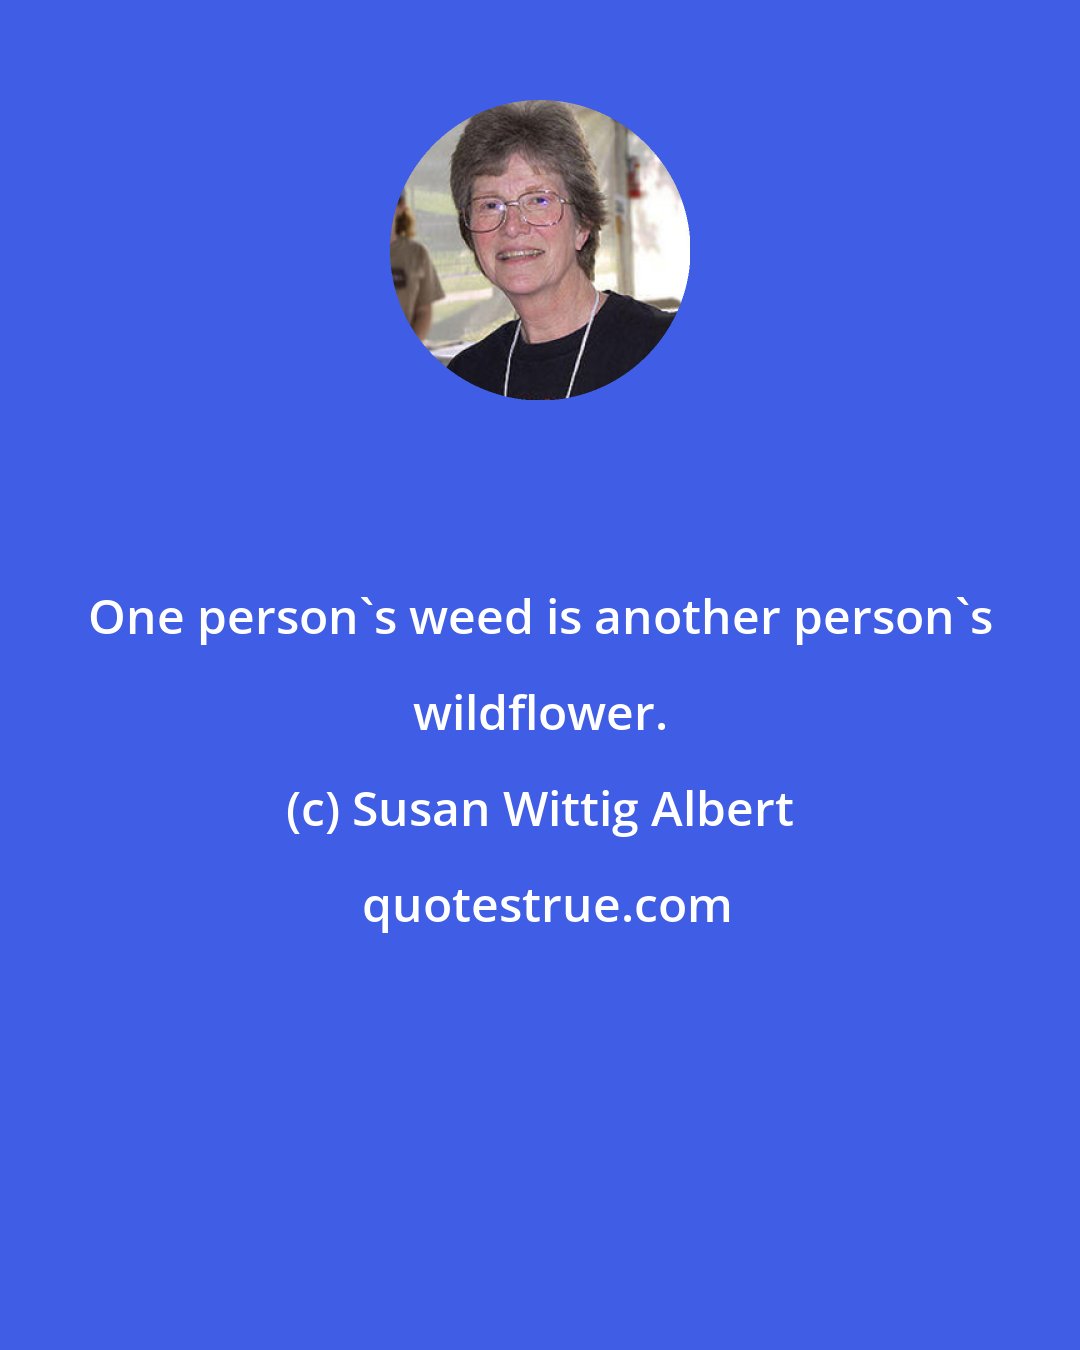 Susan Wittig Albert: One person's weed is another person's wildflower.